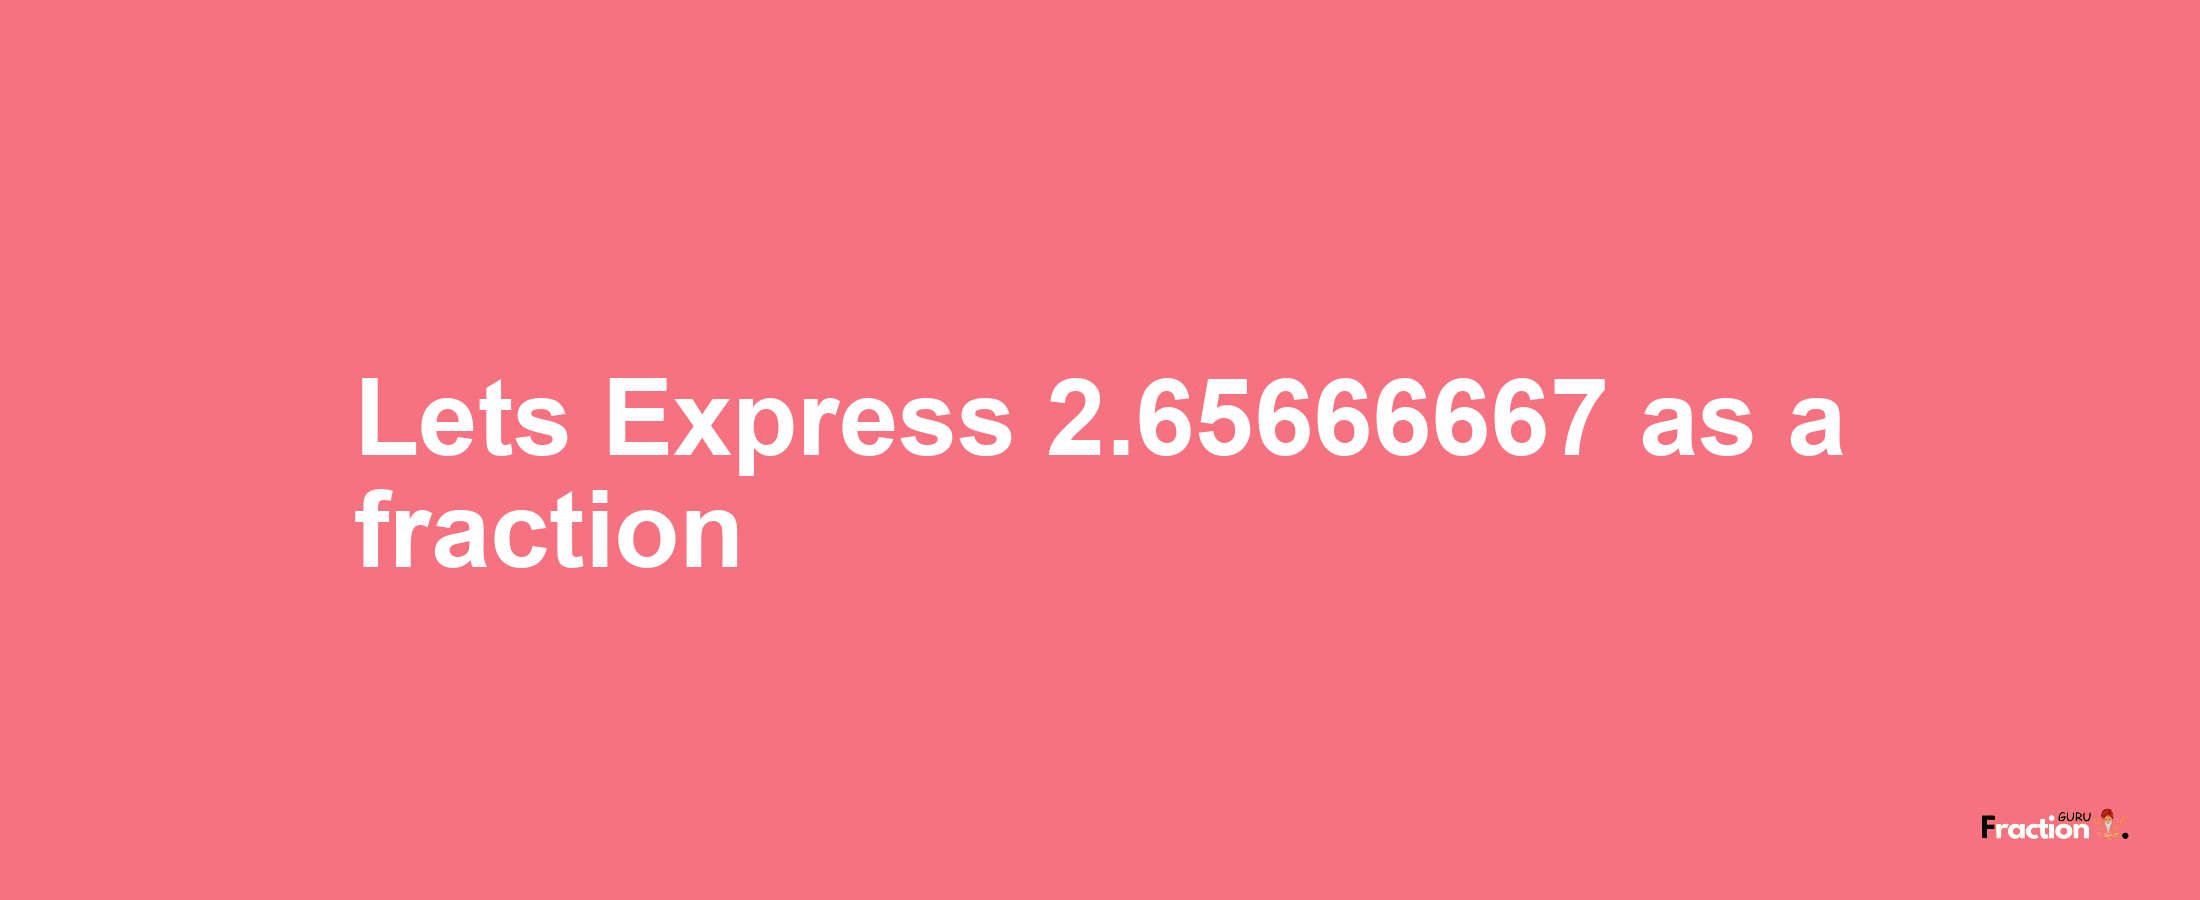 Lets Express 2.65666667 as afraction